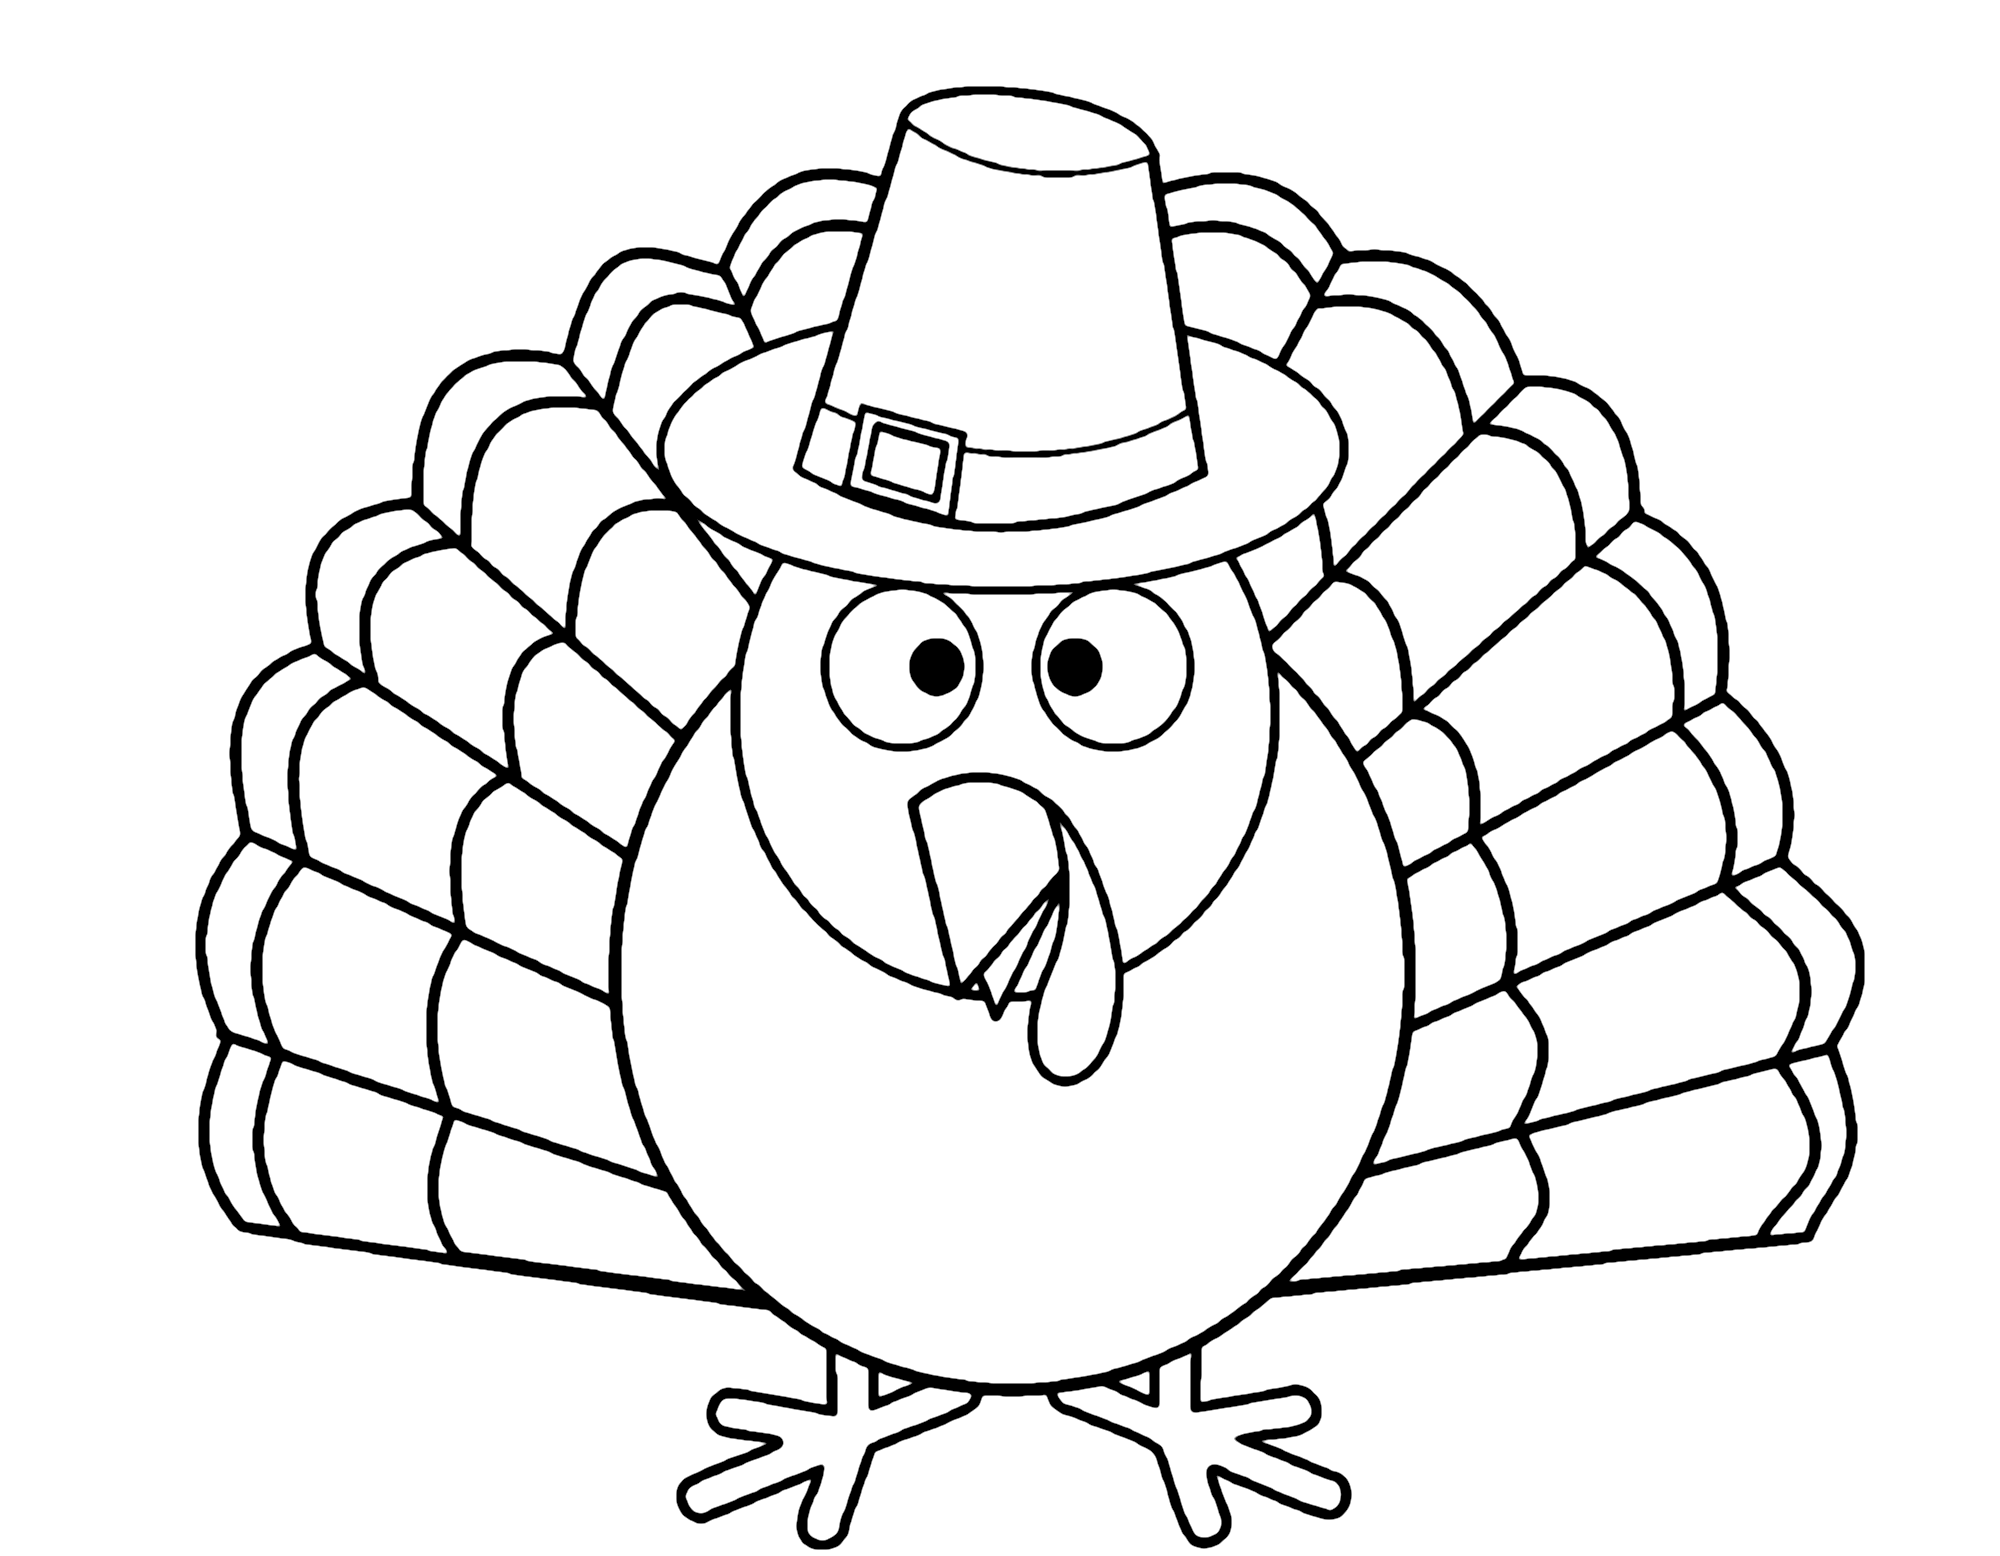 Thanksgiving Day Turkey Coloring Page